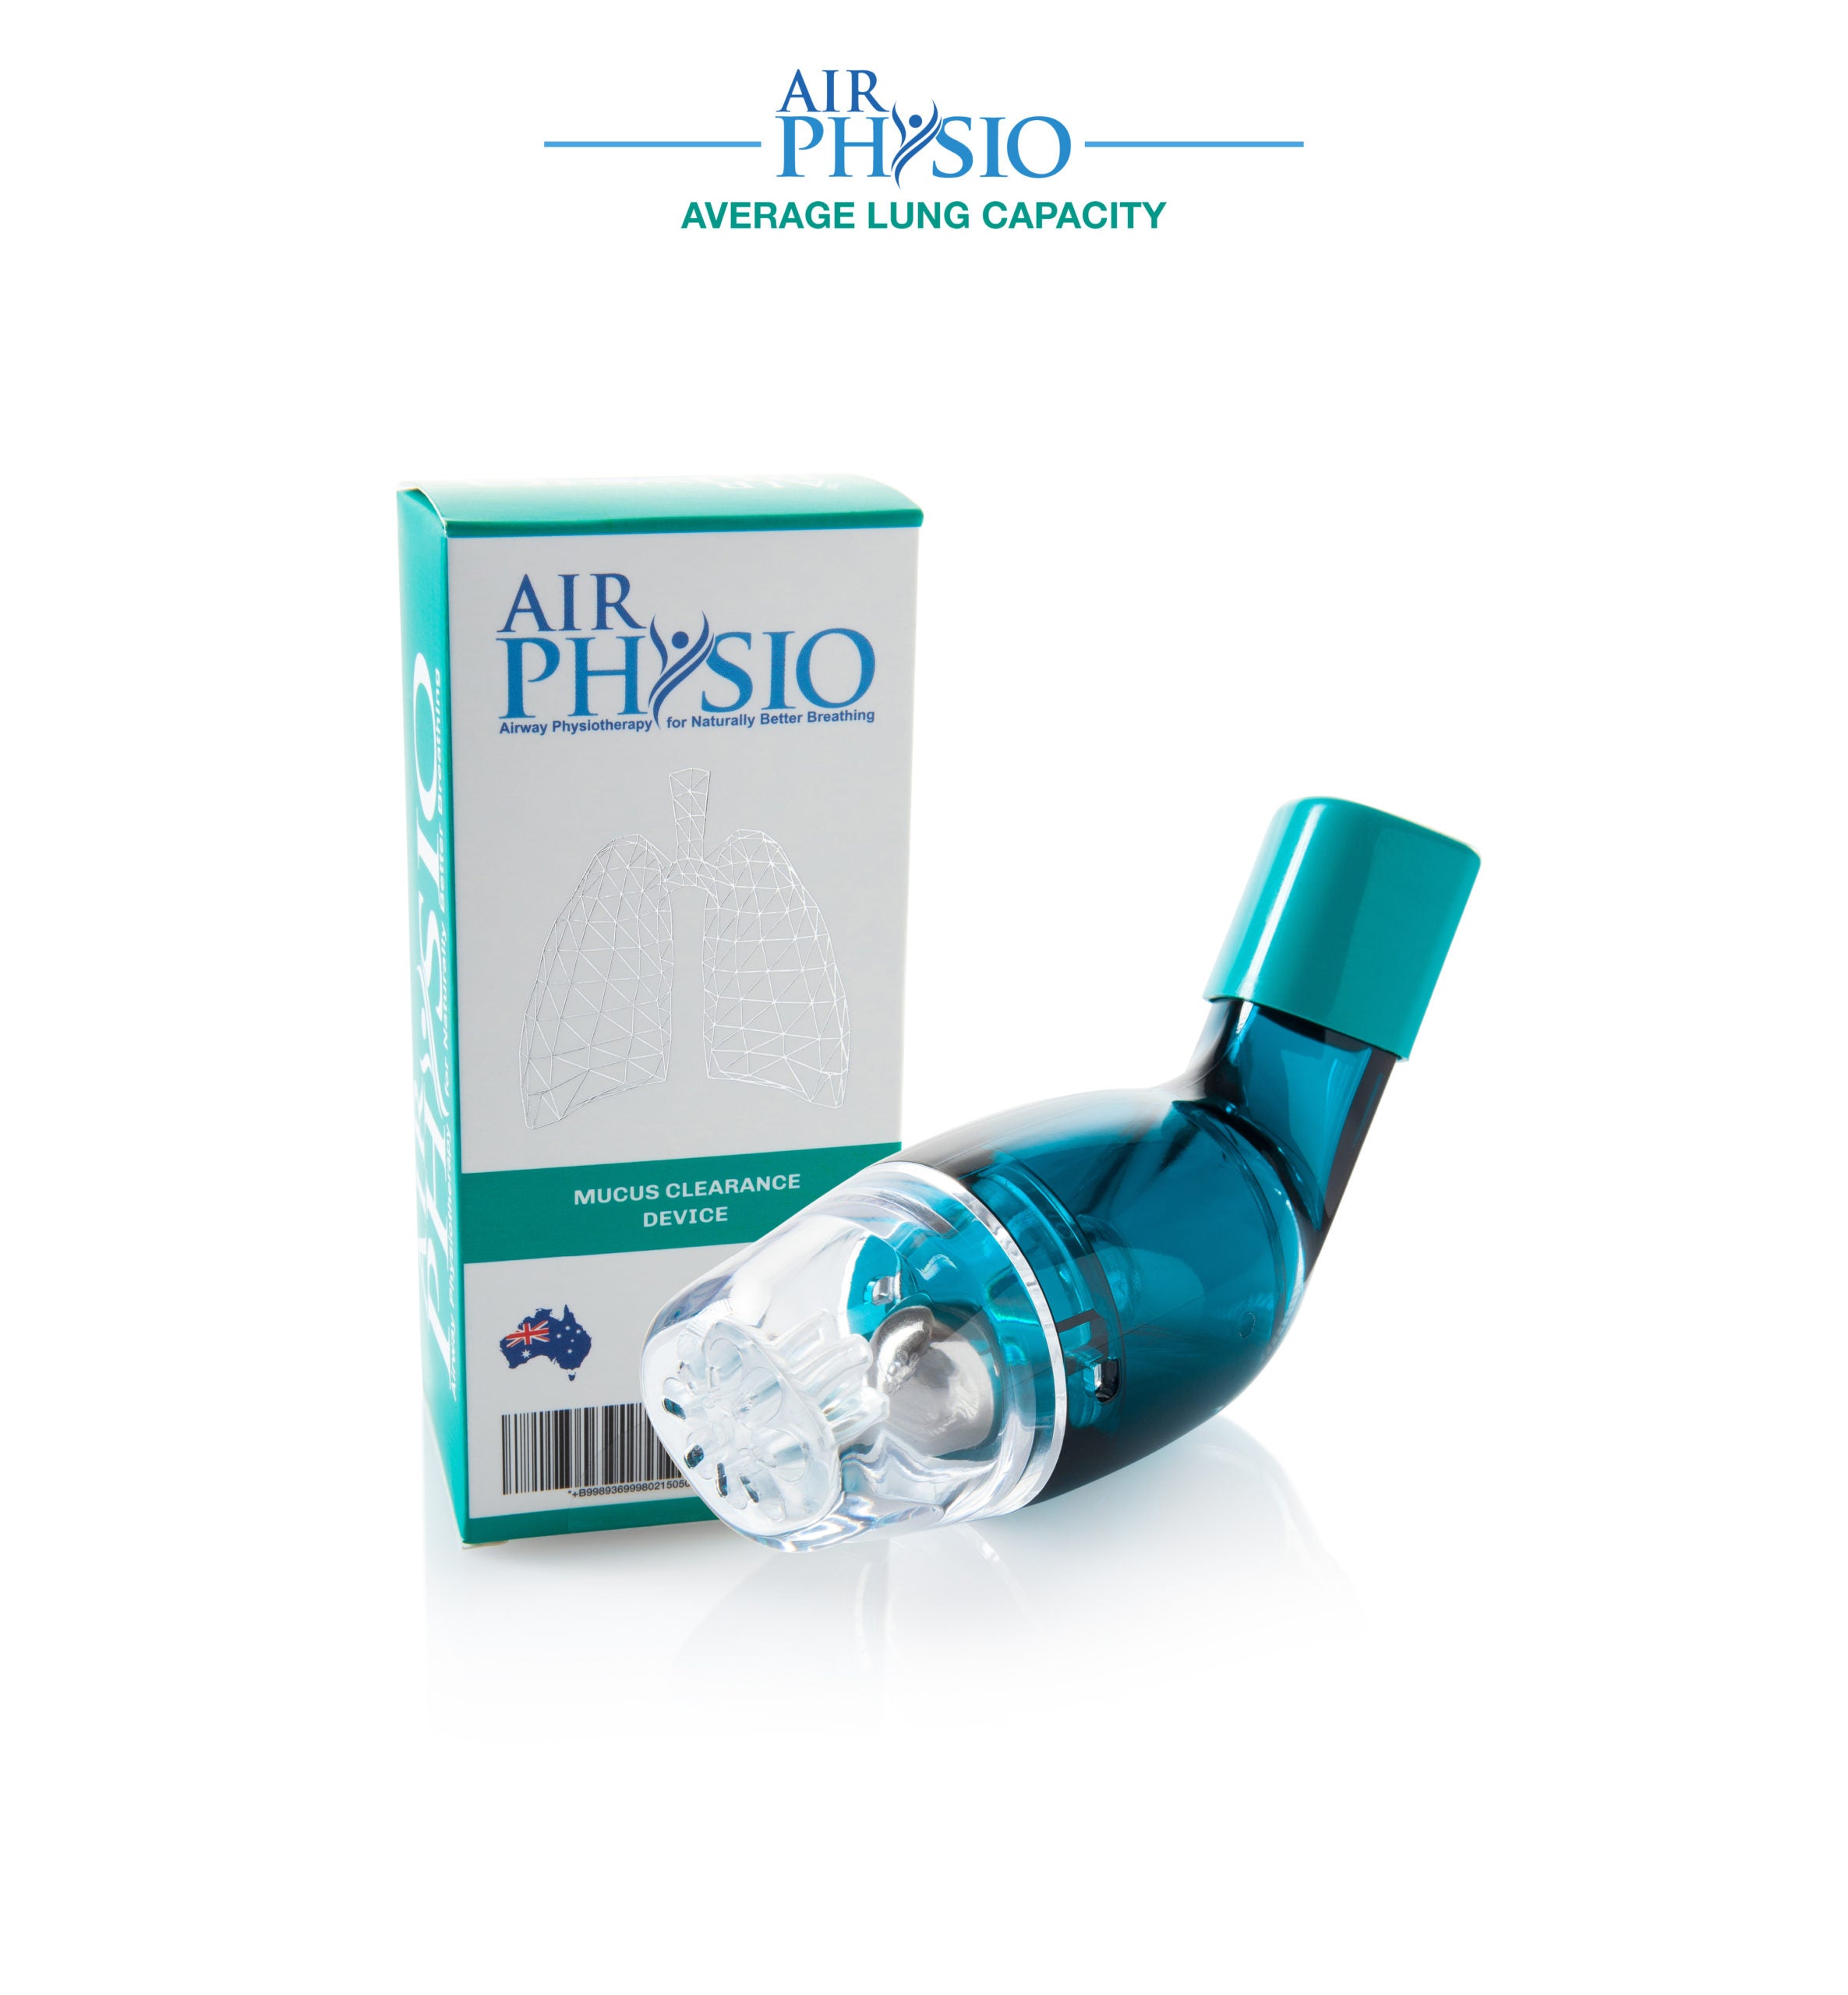 AirPhysio Mucus Clearance Device for Average Lung Capacity